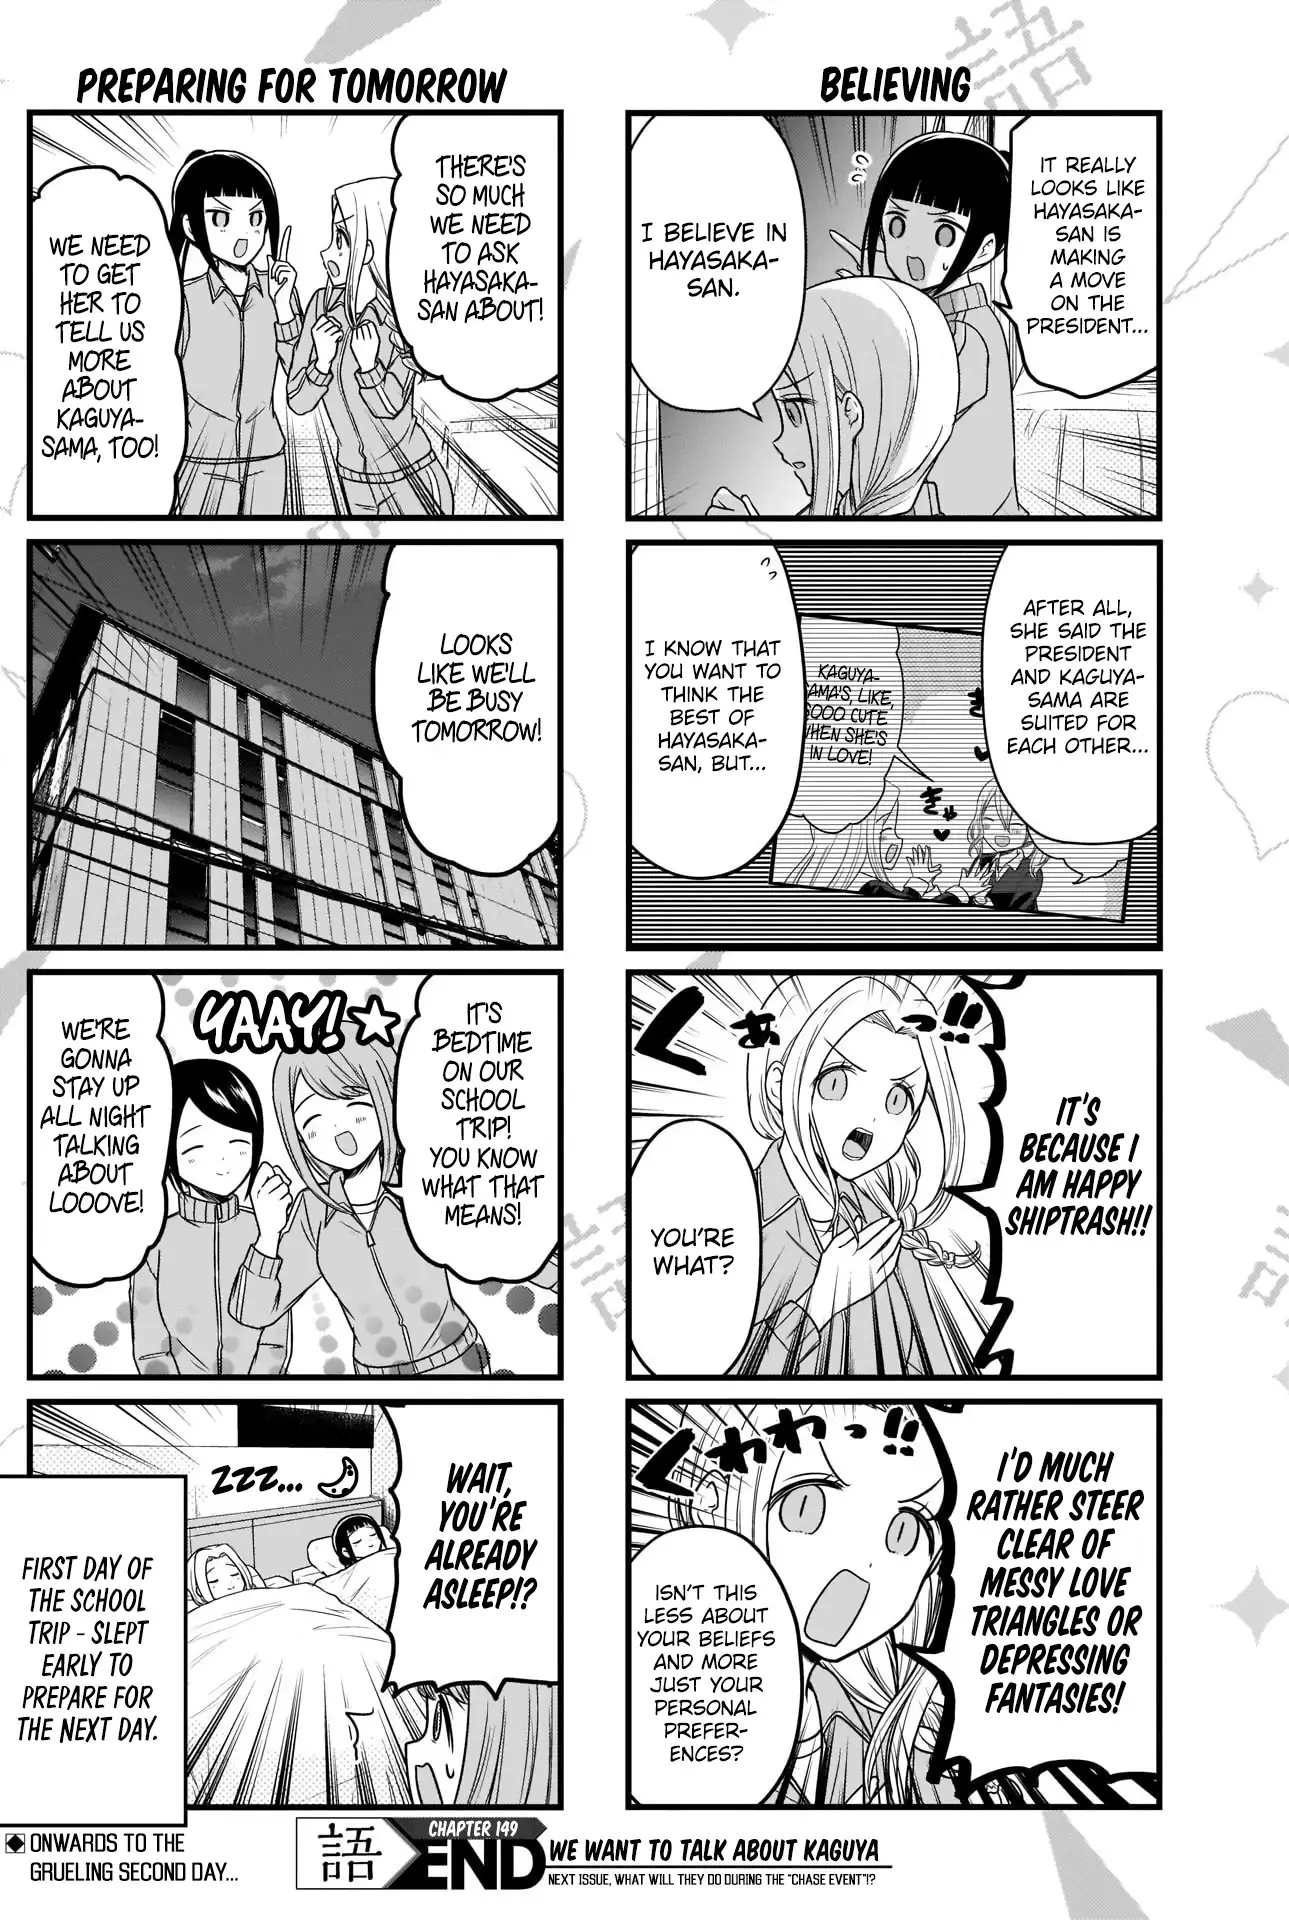 We Want To Talk About Kaguya - 149 page 4